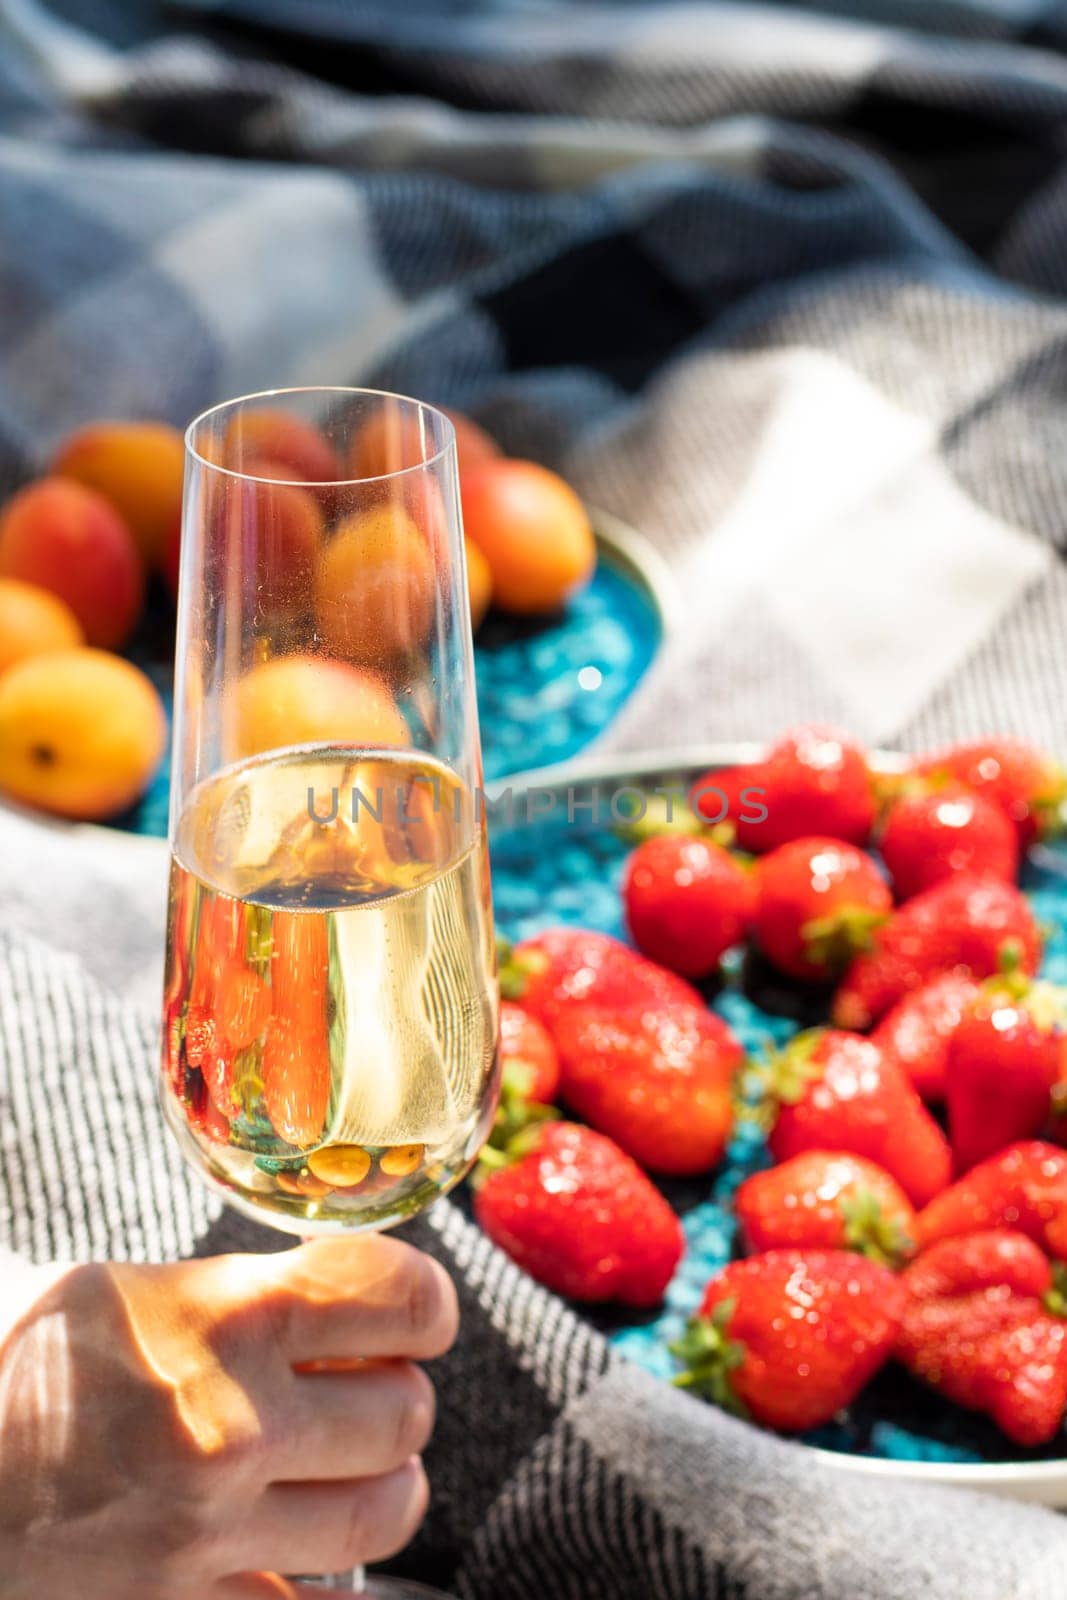 strawberries on plate with glass of champagne or white wine on picnic. Luxury lifestyle, travel concept. glass raised in hand for toast. Ripe berries. wine tasting. Vineyard. Summer fruits. aesthetics